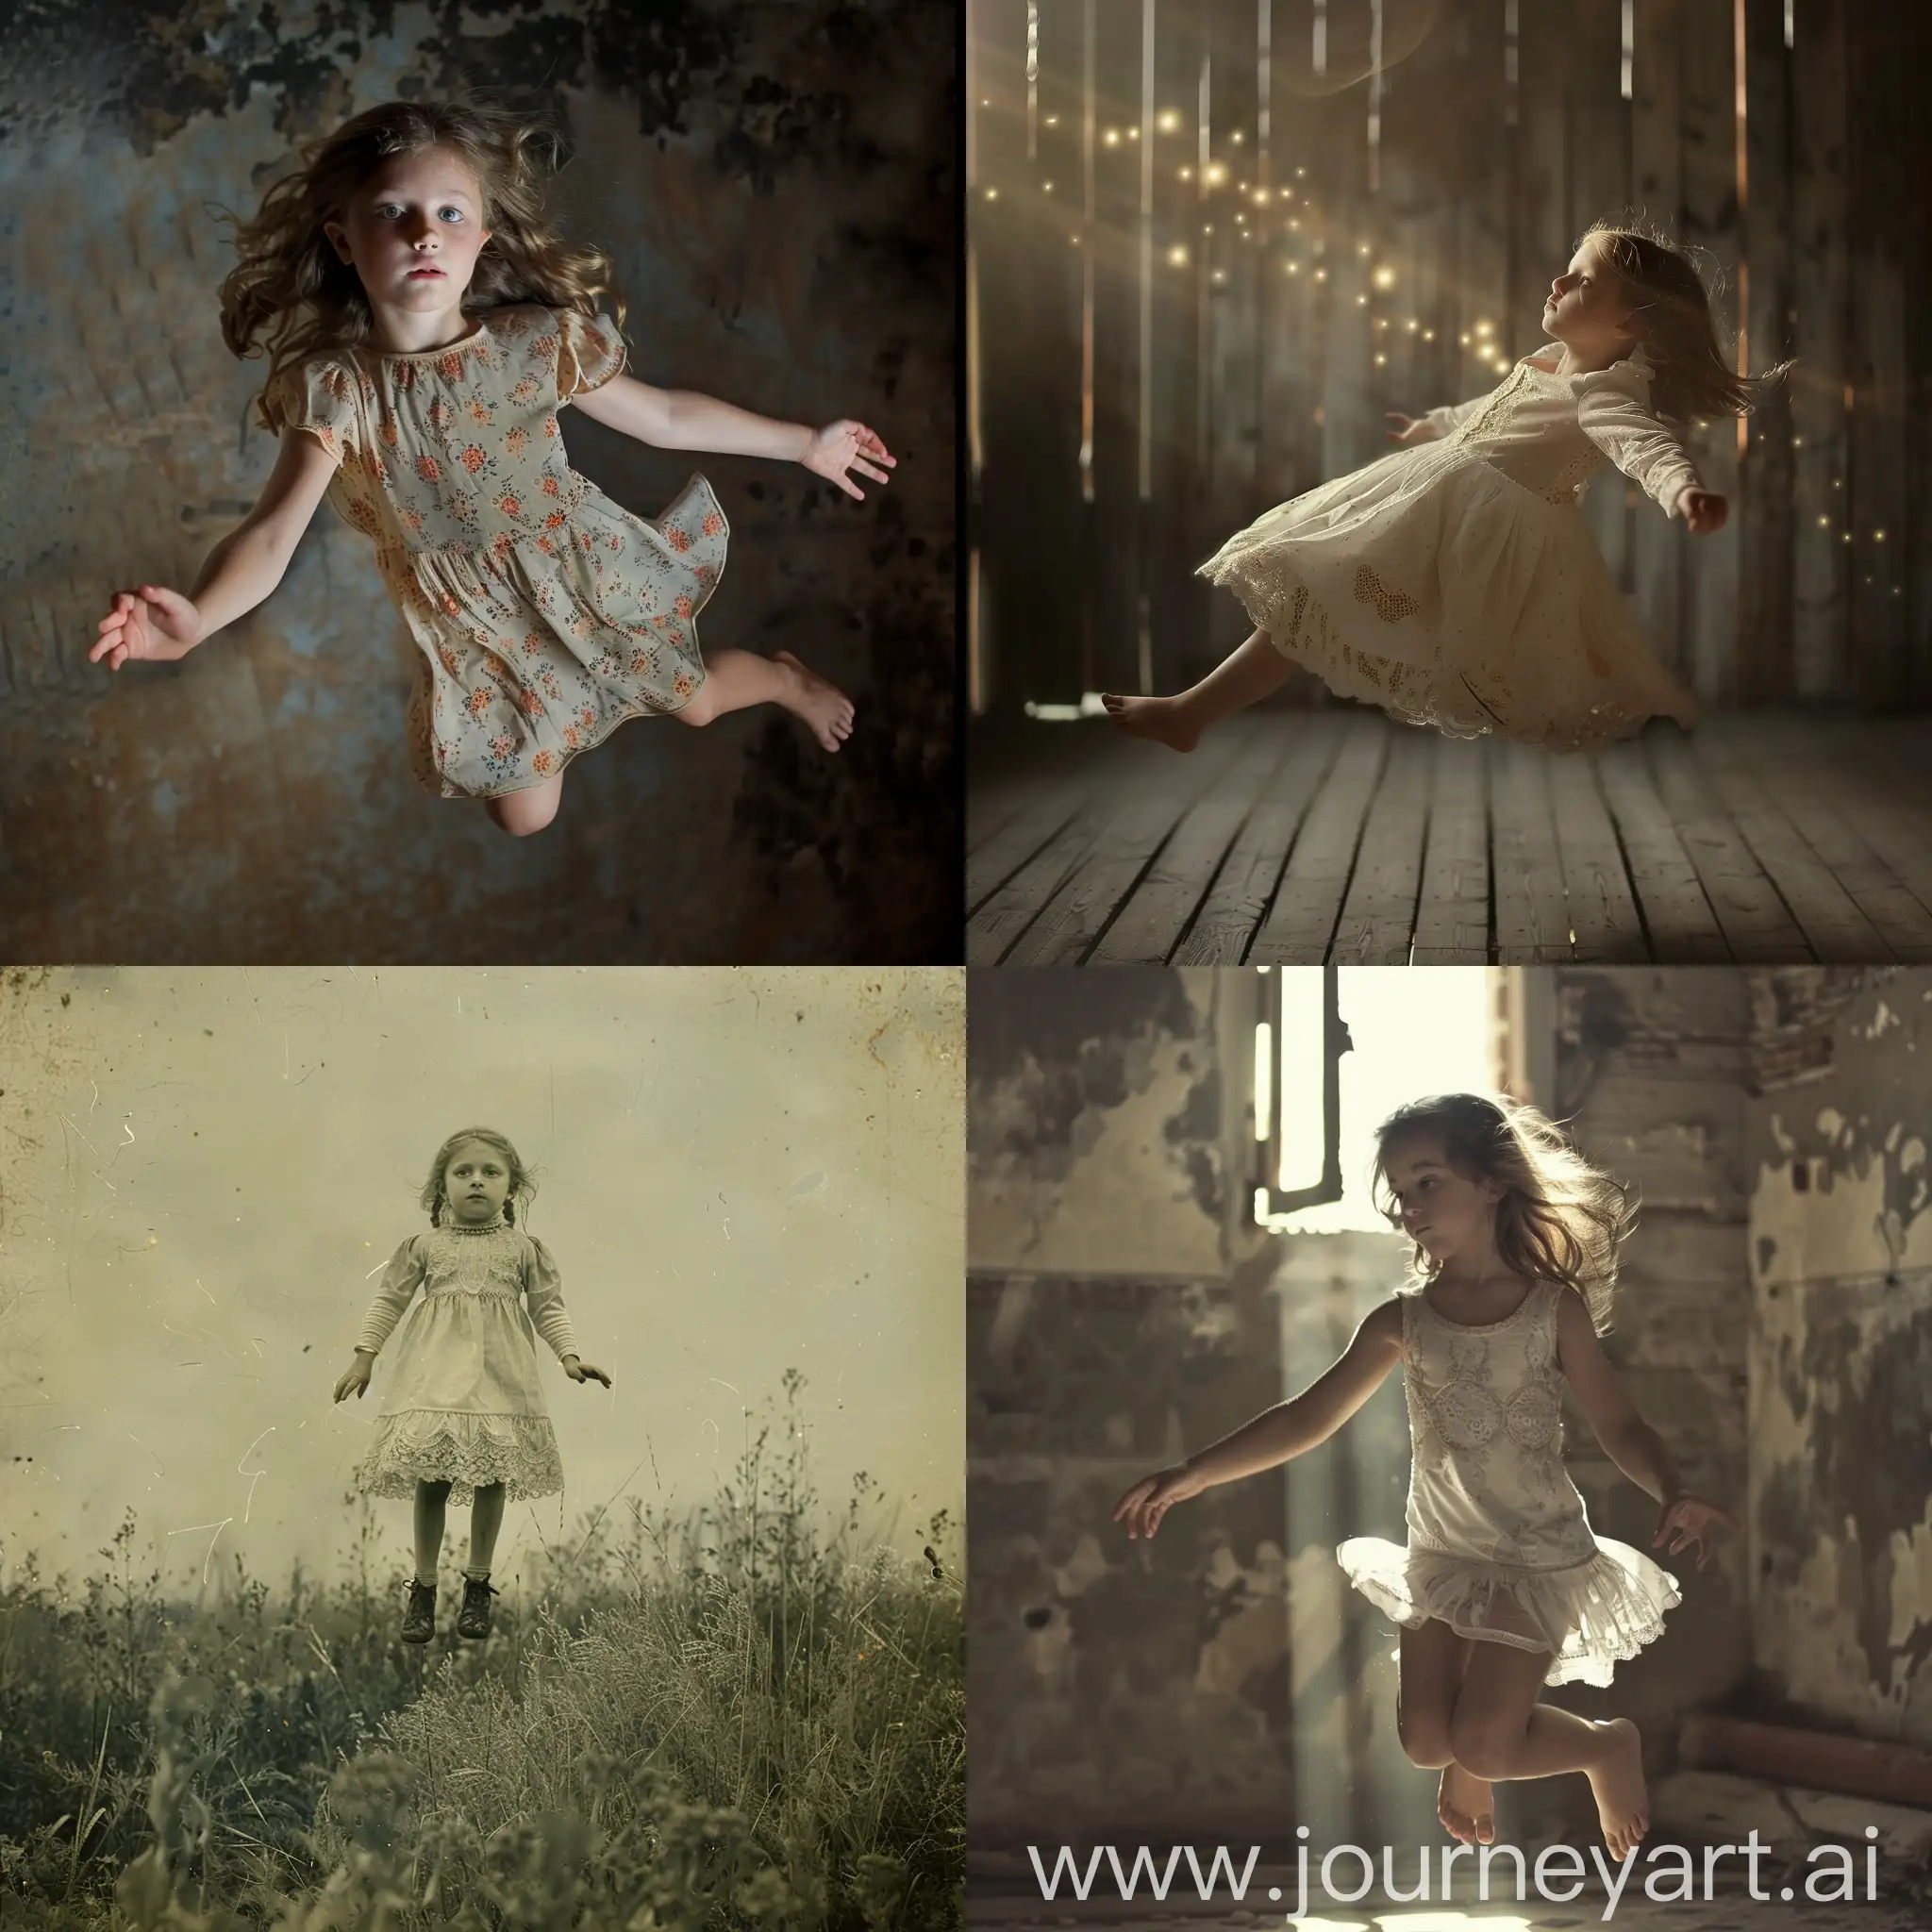 A young girl levitating
